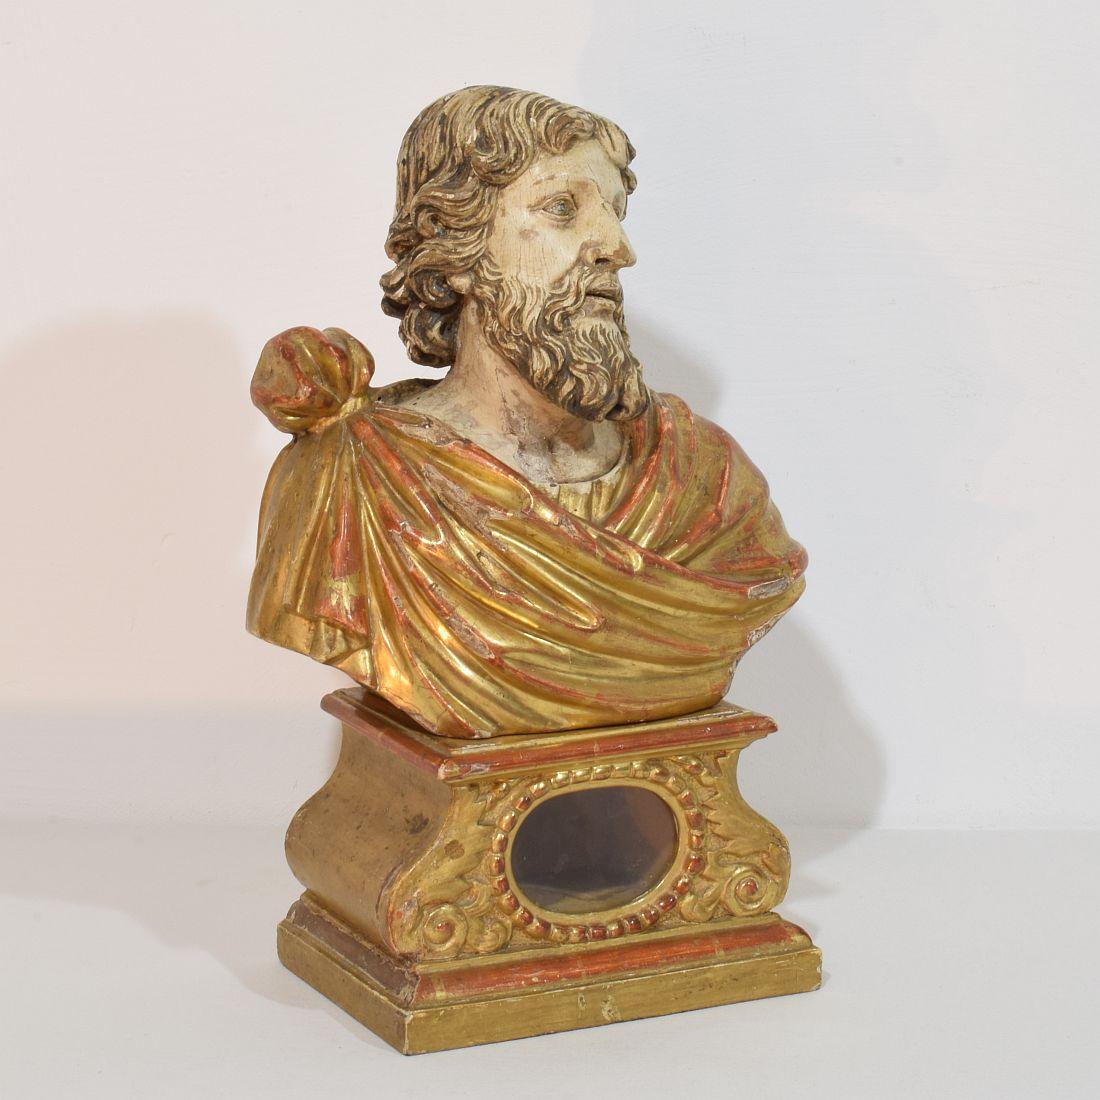 Baroque 17th-18th Century Italian Hand carved Wooden Reliquary Bust of a Saint For Sale